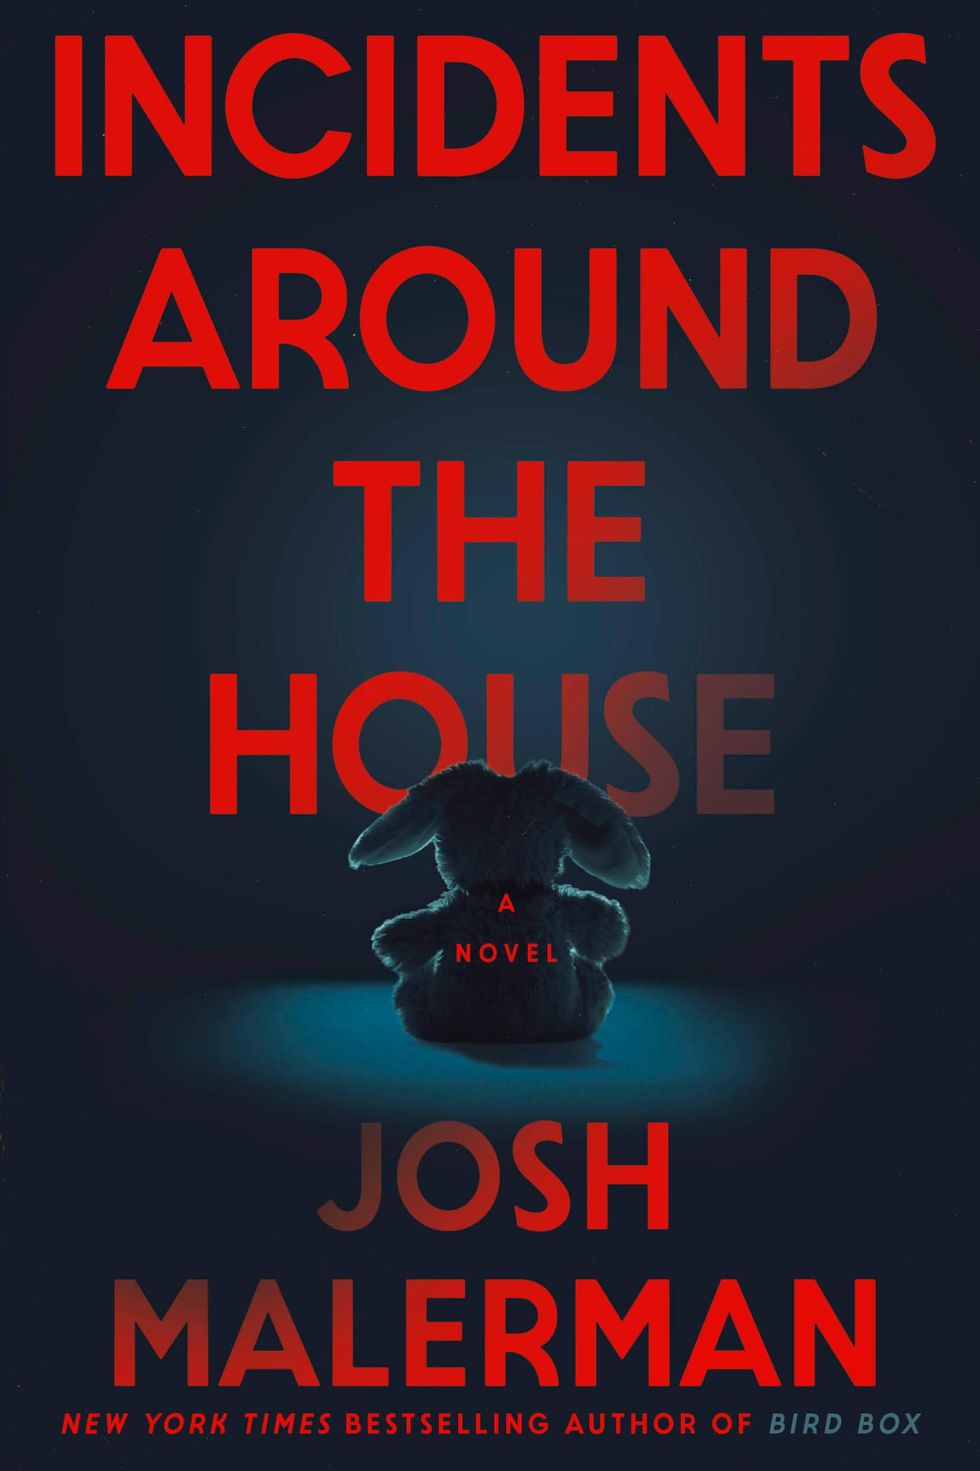 Incidents Around the House, by Josh Malerman